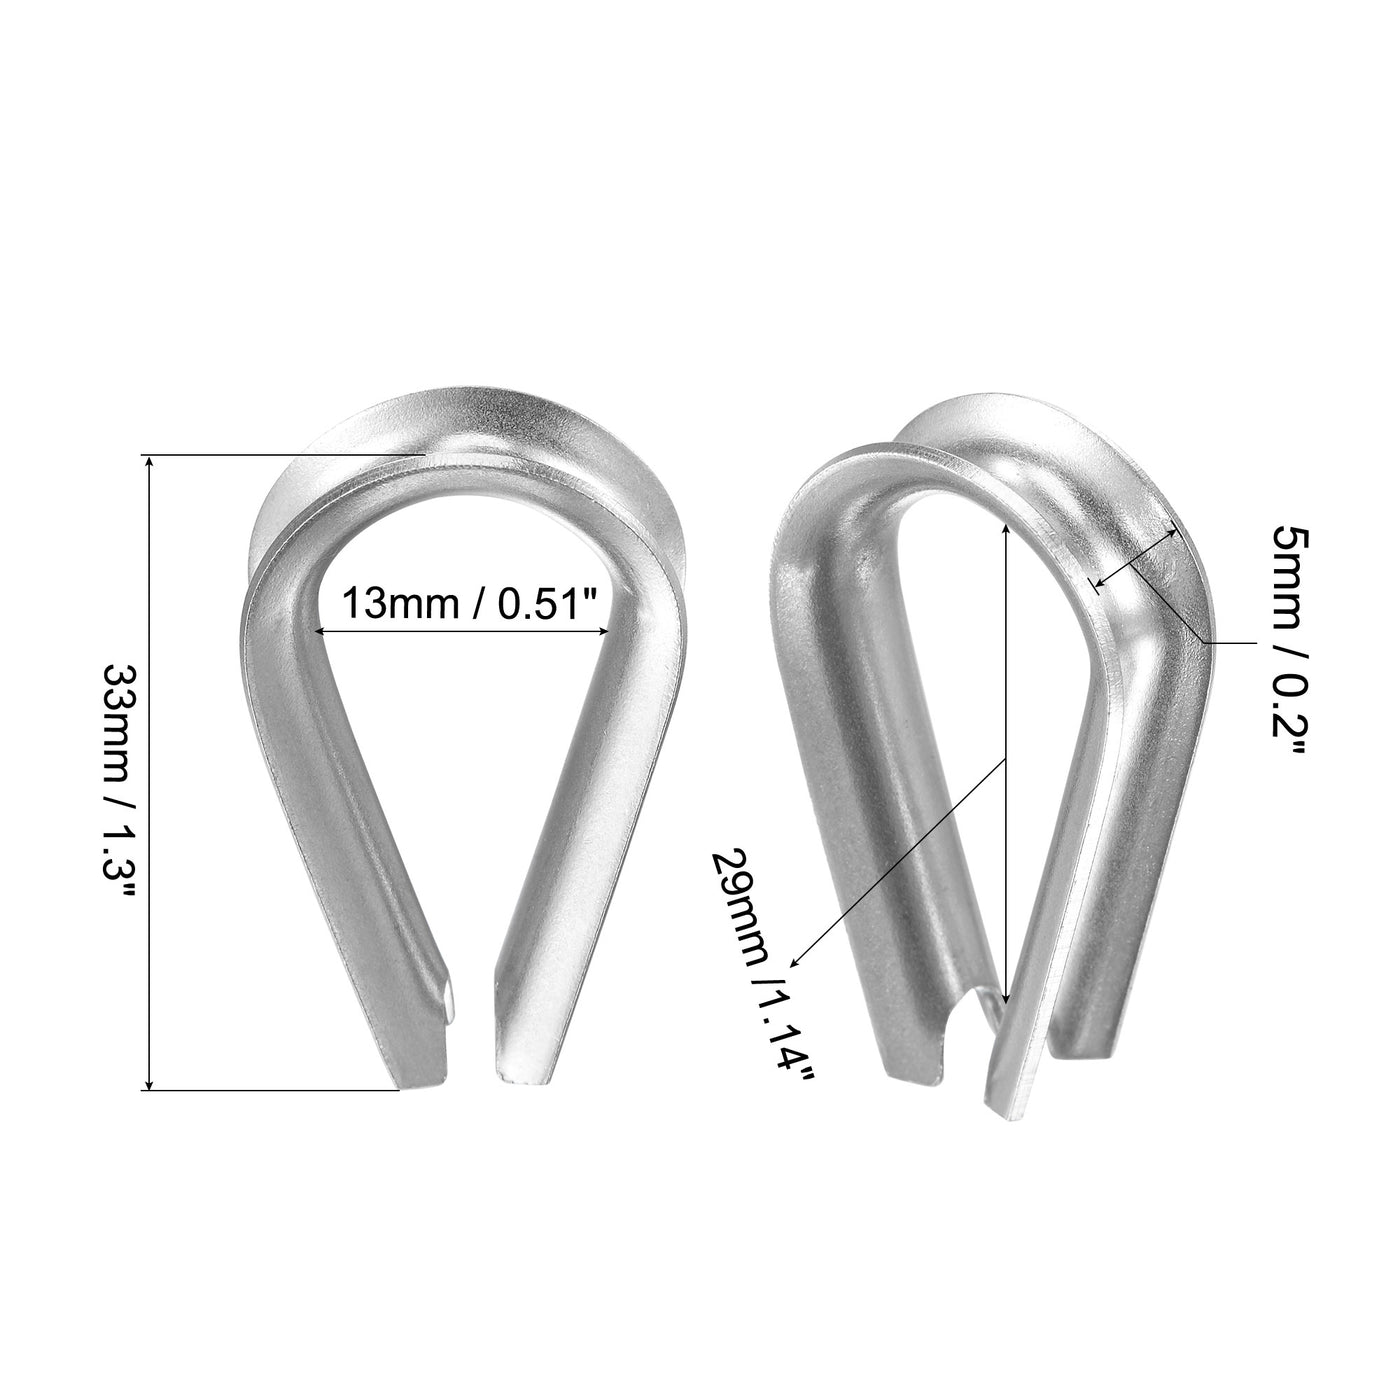 uxcell Uxcell Wire Rope Cable Clip Kit for M5, Included Rope Clamp 5Pcs and Thimble Rigging 5Pcs, 304 Stainless Steel U Bolt Saddle Fastener